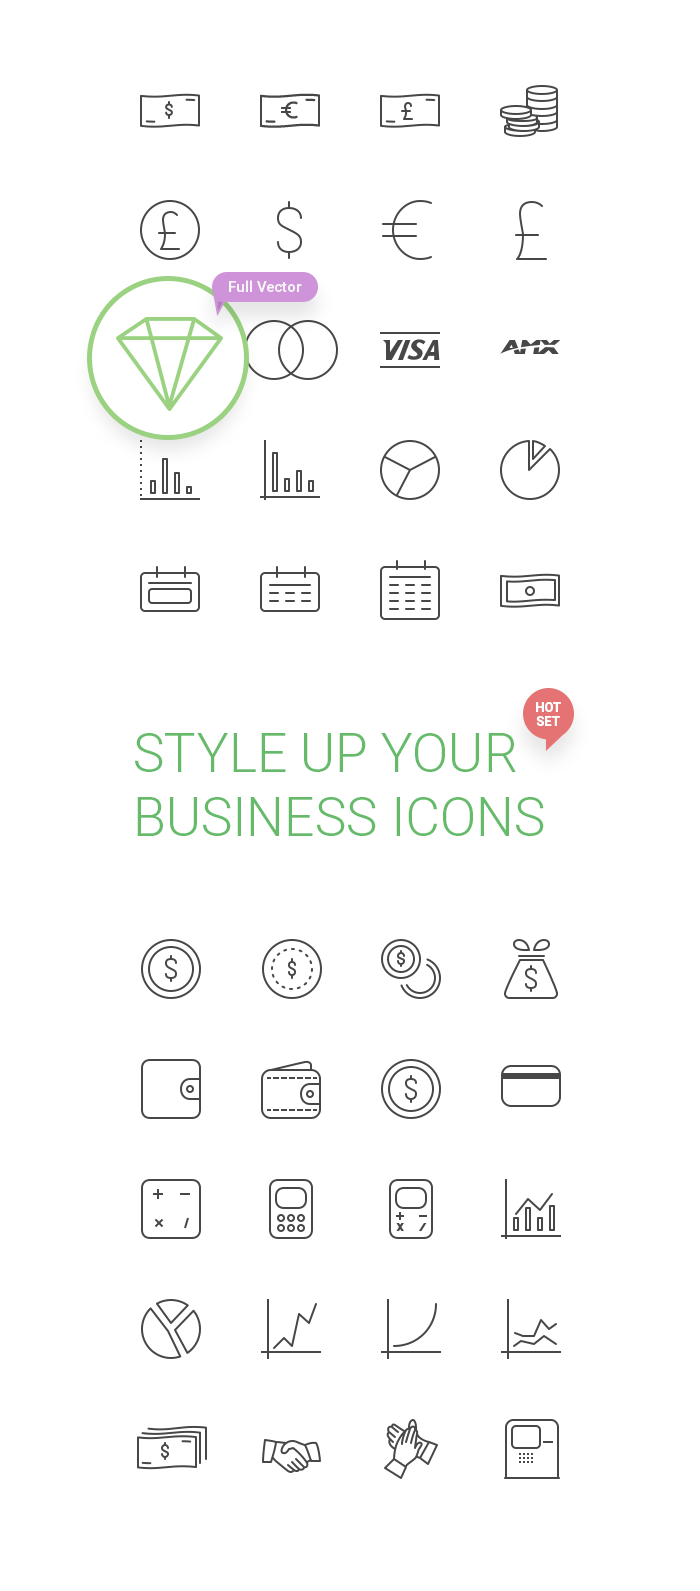 Free business icons